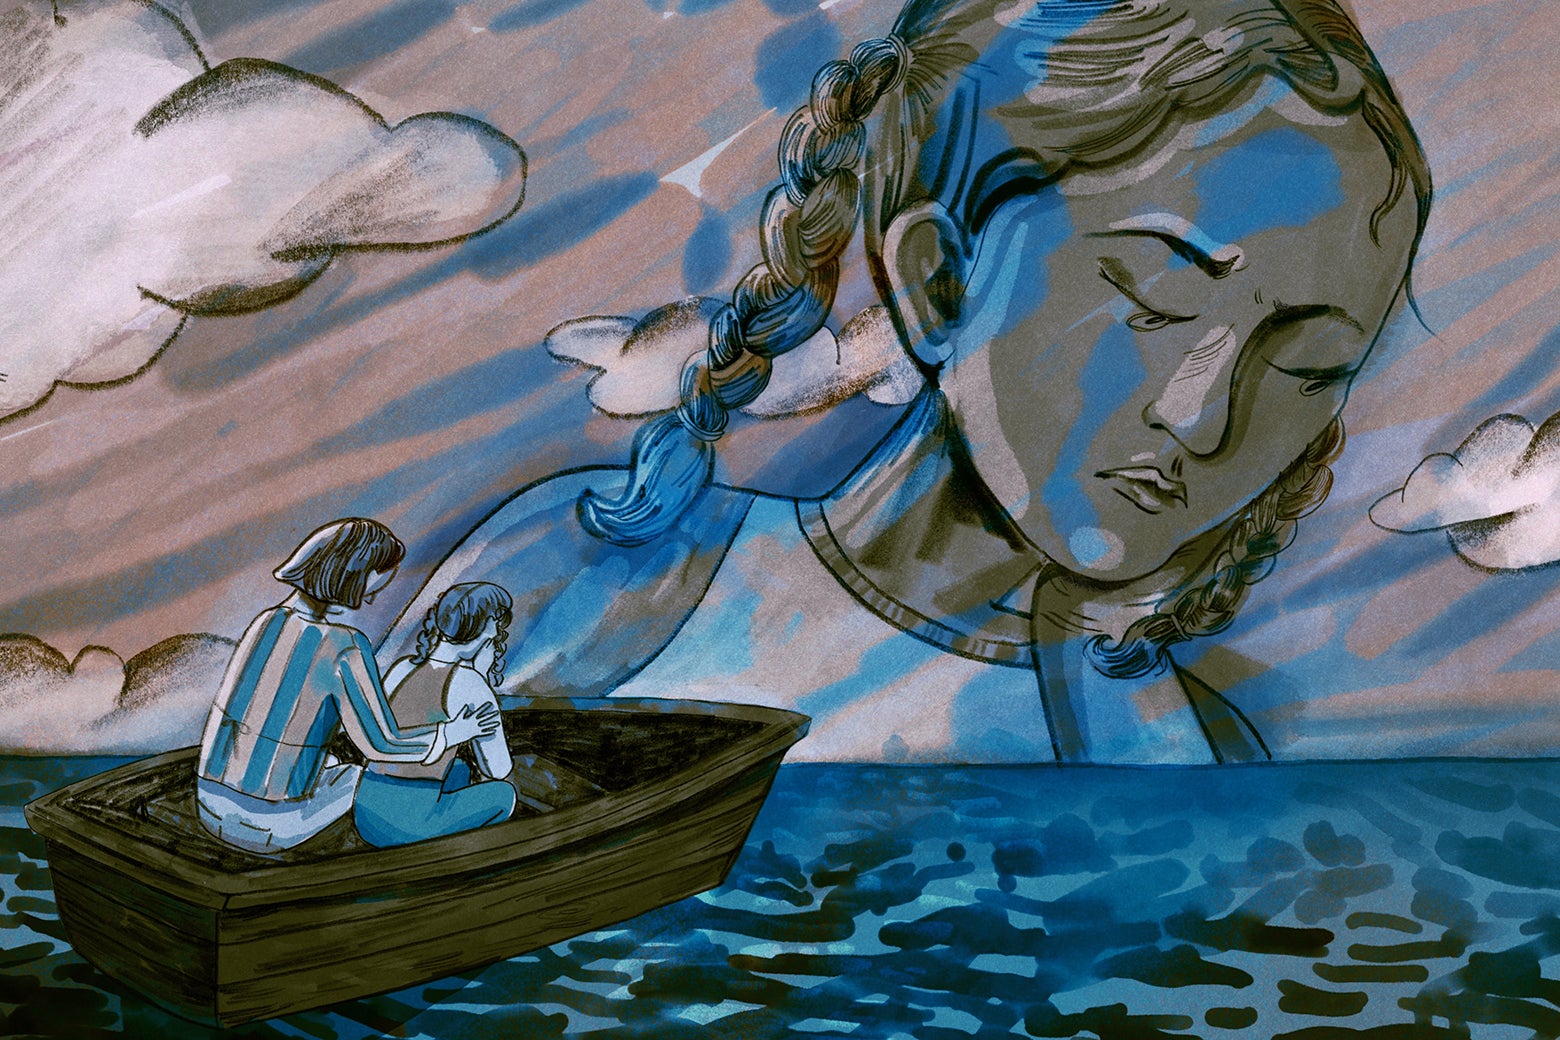 traveling A mom and child in a boat on a dark ocean taking a trip far from us; the sky and horizon are a mural of a weeping girl with braids. 